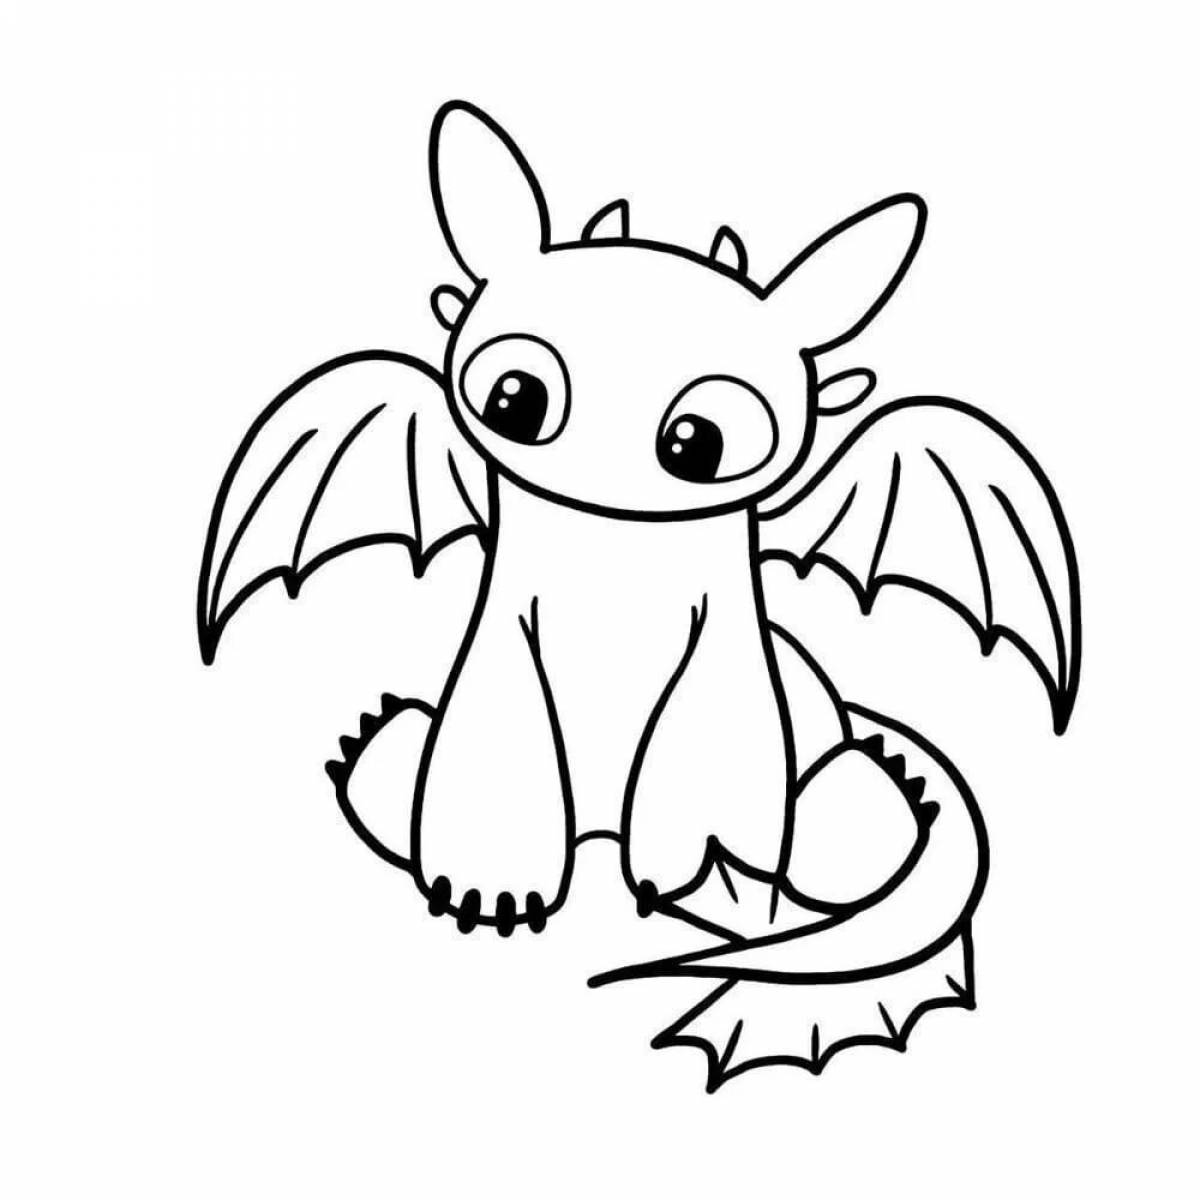 Cute and colorful dragon coloring book